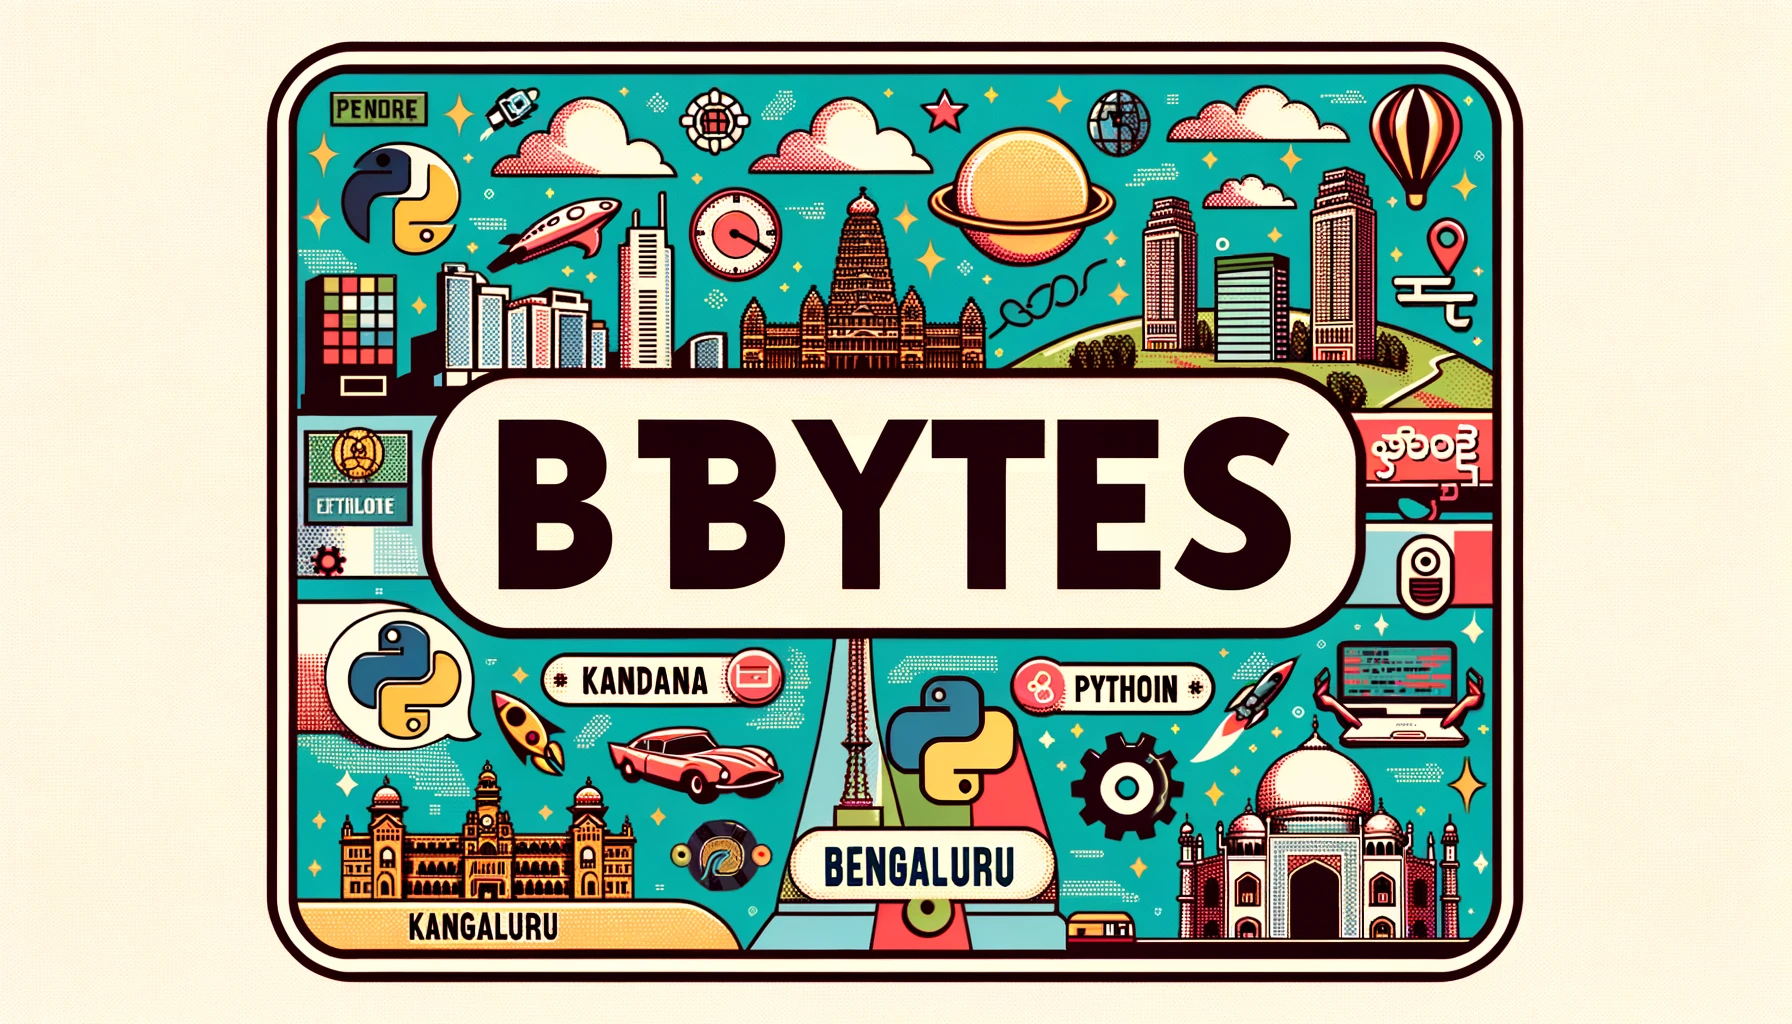 2D mid 20th century comic styled rectangular logo in pastel colors. 'BTBYTES' is prominently displayed at the top, integrating illustrations of Bengaluru's landmarks. Below, the words 'BENGALURU', 'KANNADA', 'PYTHON', and 'OPEN SOURCE' are placed in a vintage font, accompanied by technology icons and hints of Kannada script. The entire design carries a retro feel with modern elements.